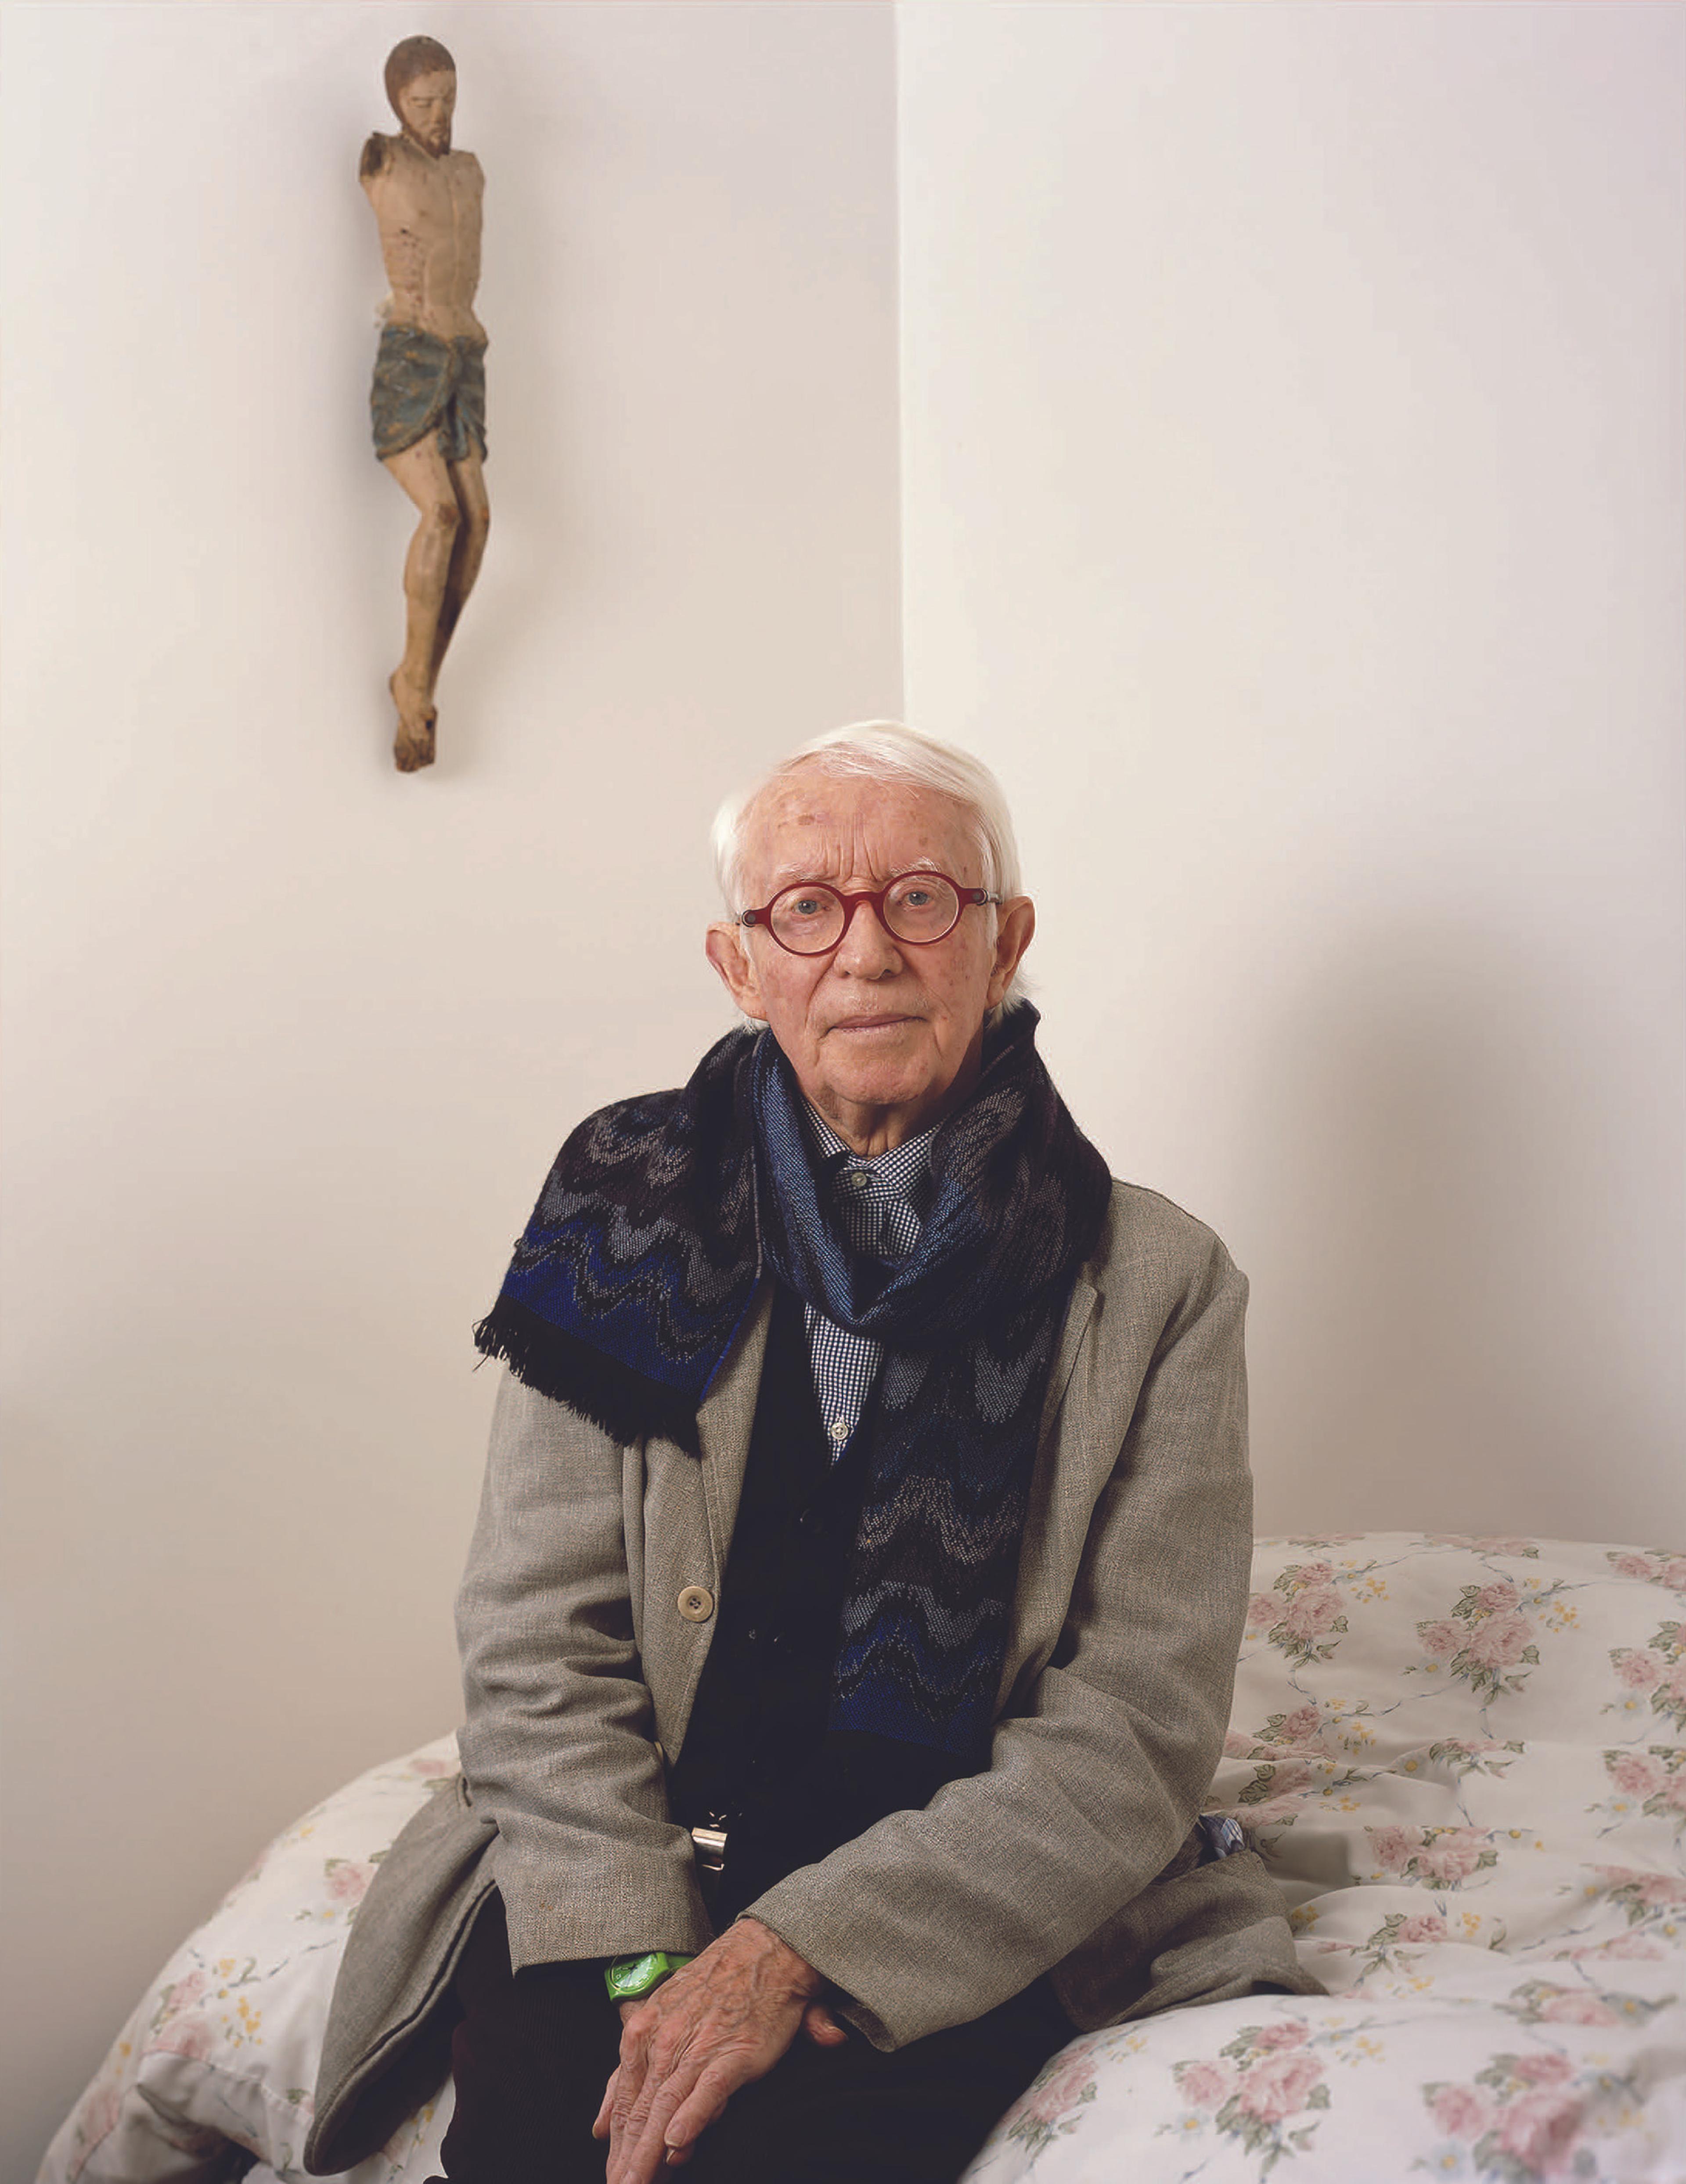 Yvonne Todd, Peter, 2014, chromogenic photograph, commissioned from the artist in 2014, Collection of Peter McLeavey.